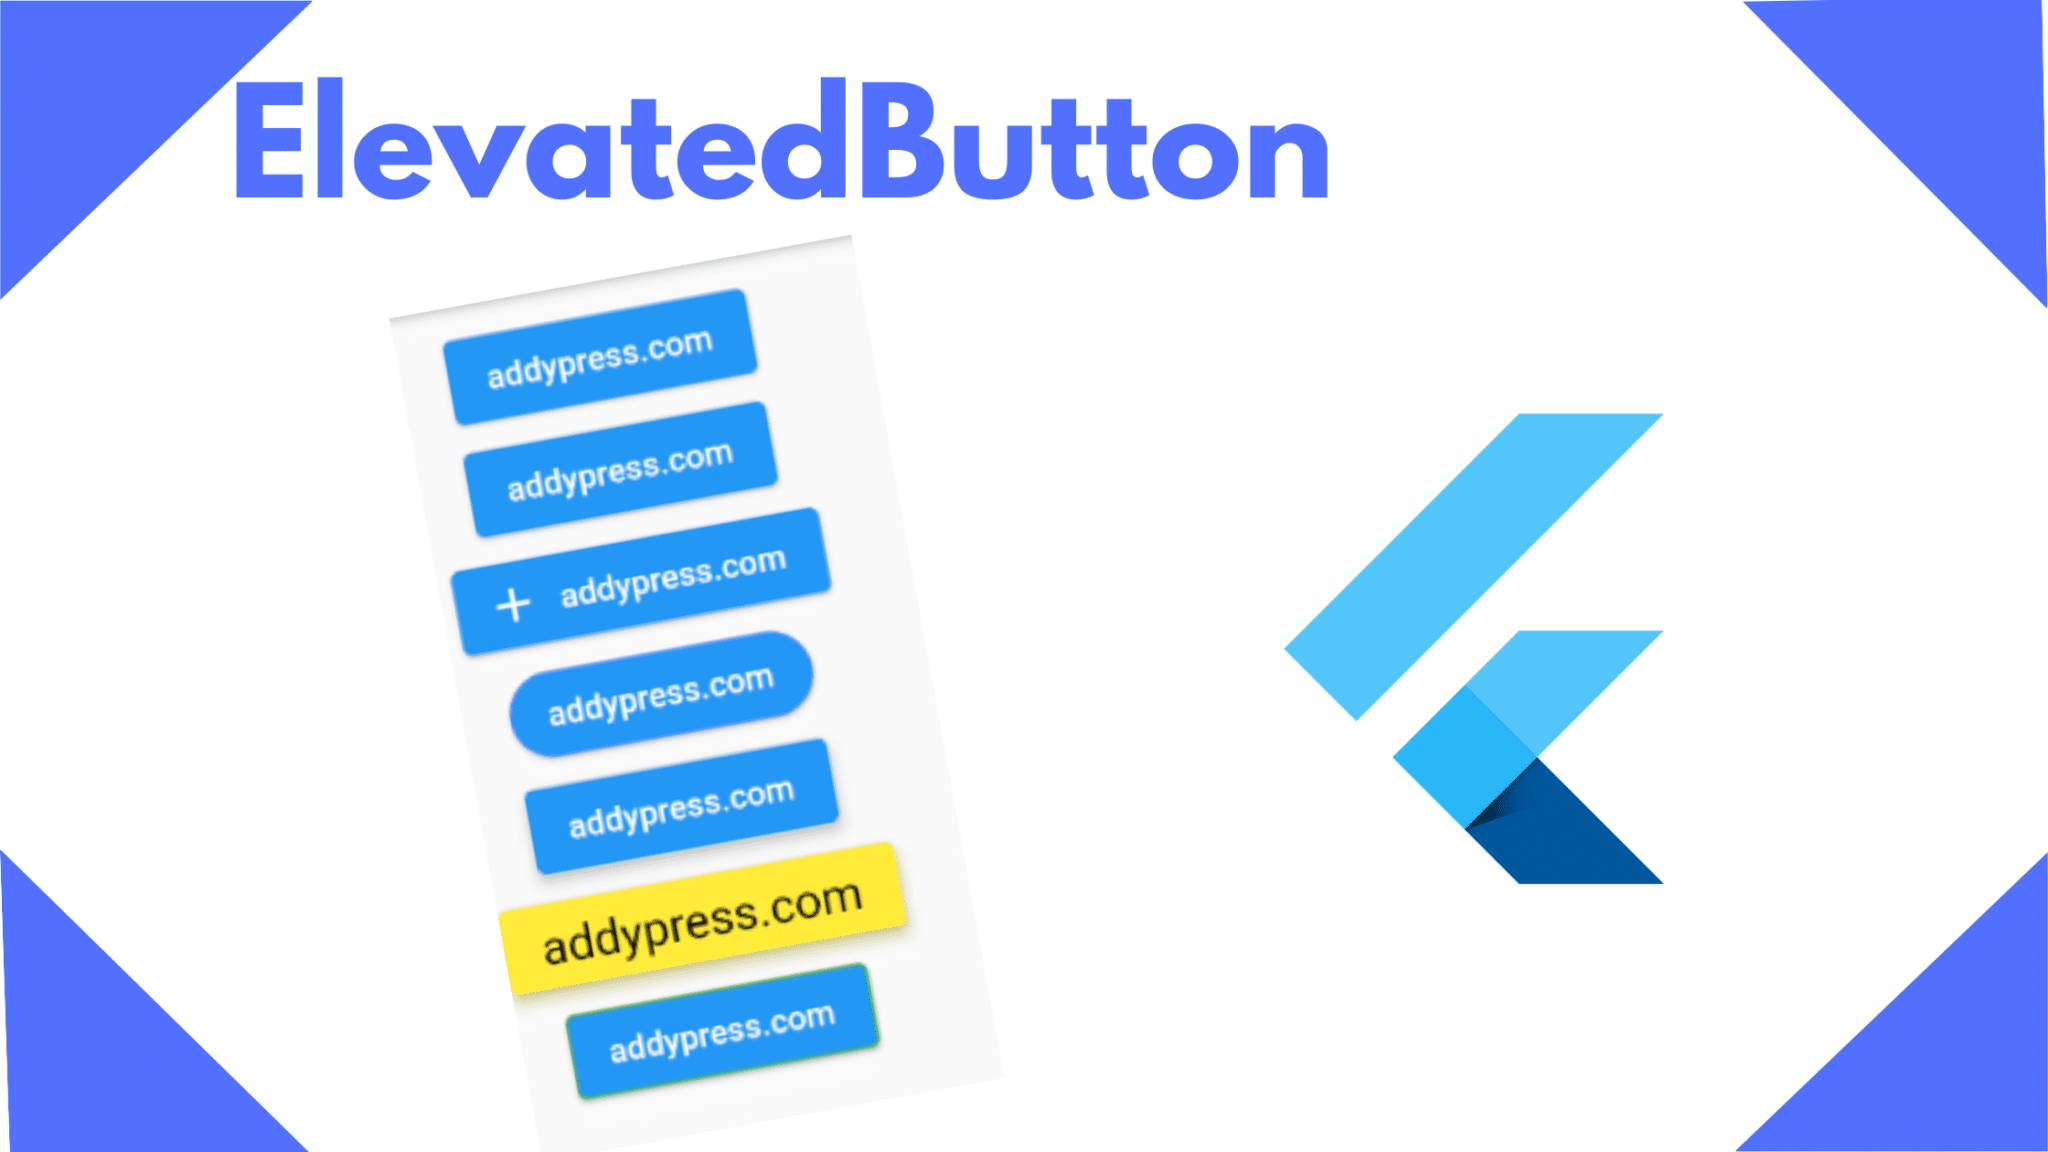 How to use Elevated Button in flutter 2021